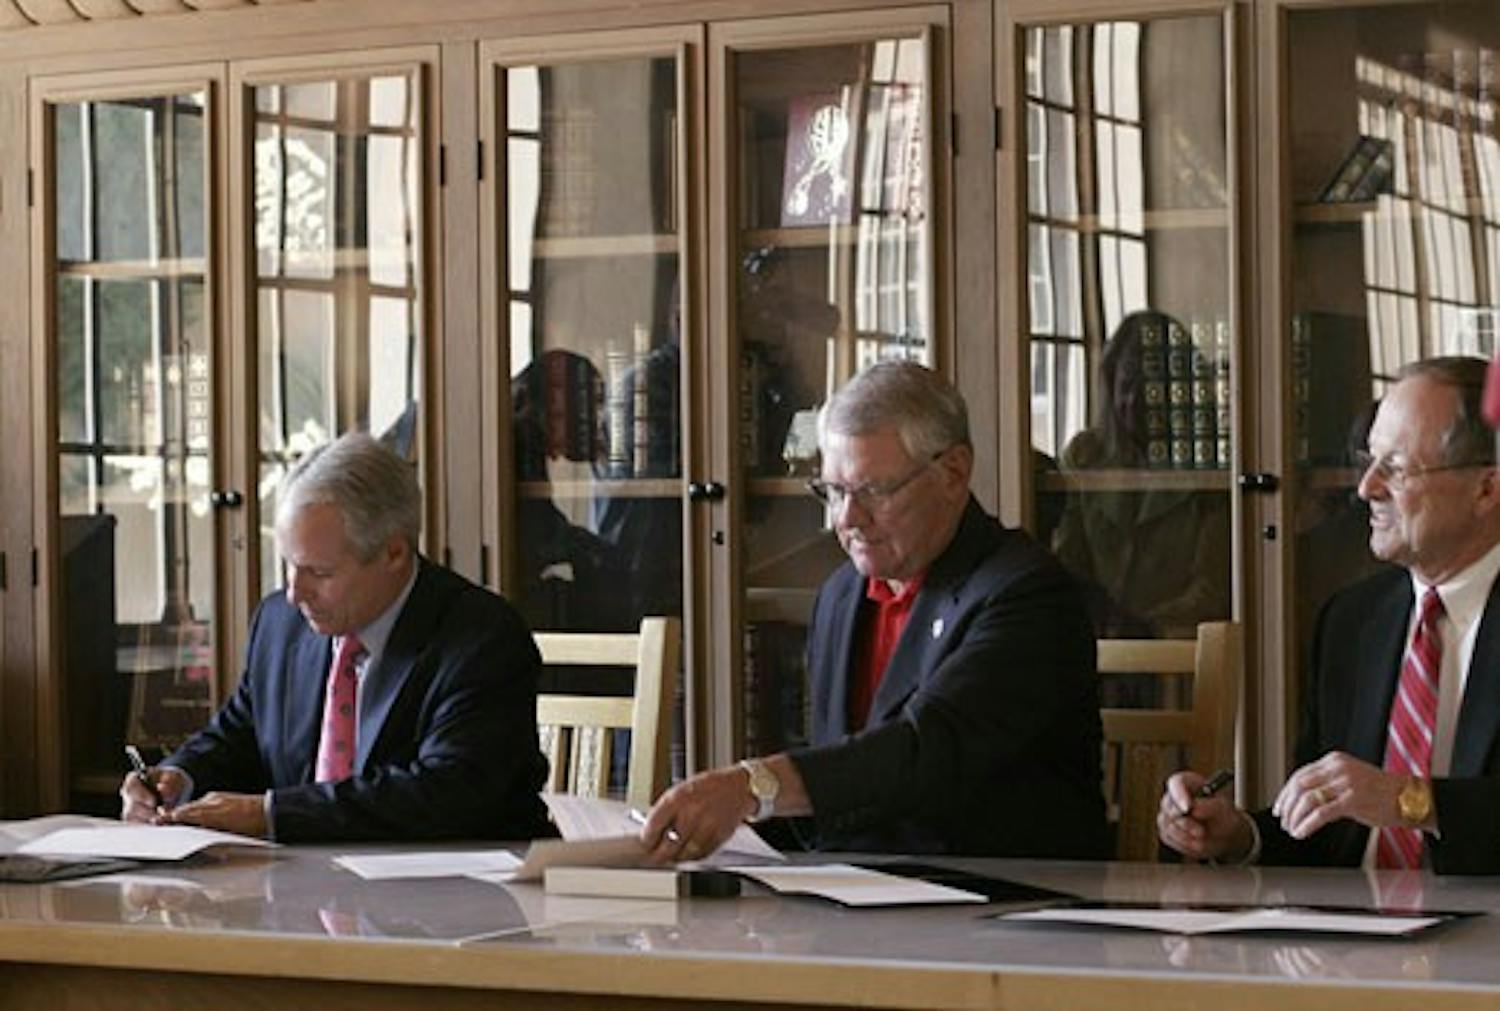 Mayor Martin Chavez, left, UNM President David Schmidly, and Sandia National Laboratories President Tom Hunter sign a Memorandum of Understanding in Zimmerman Library on June 19. The MOU provides for a collaborative agreement between the three parties.